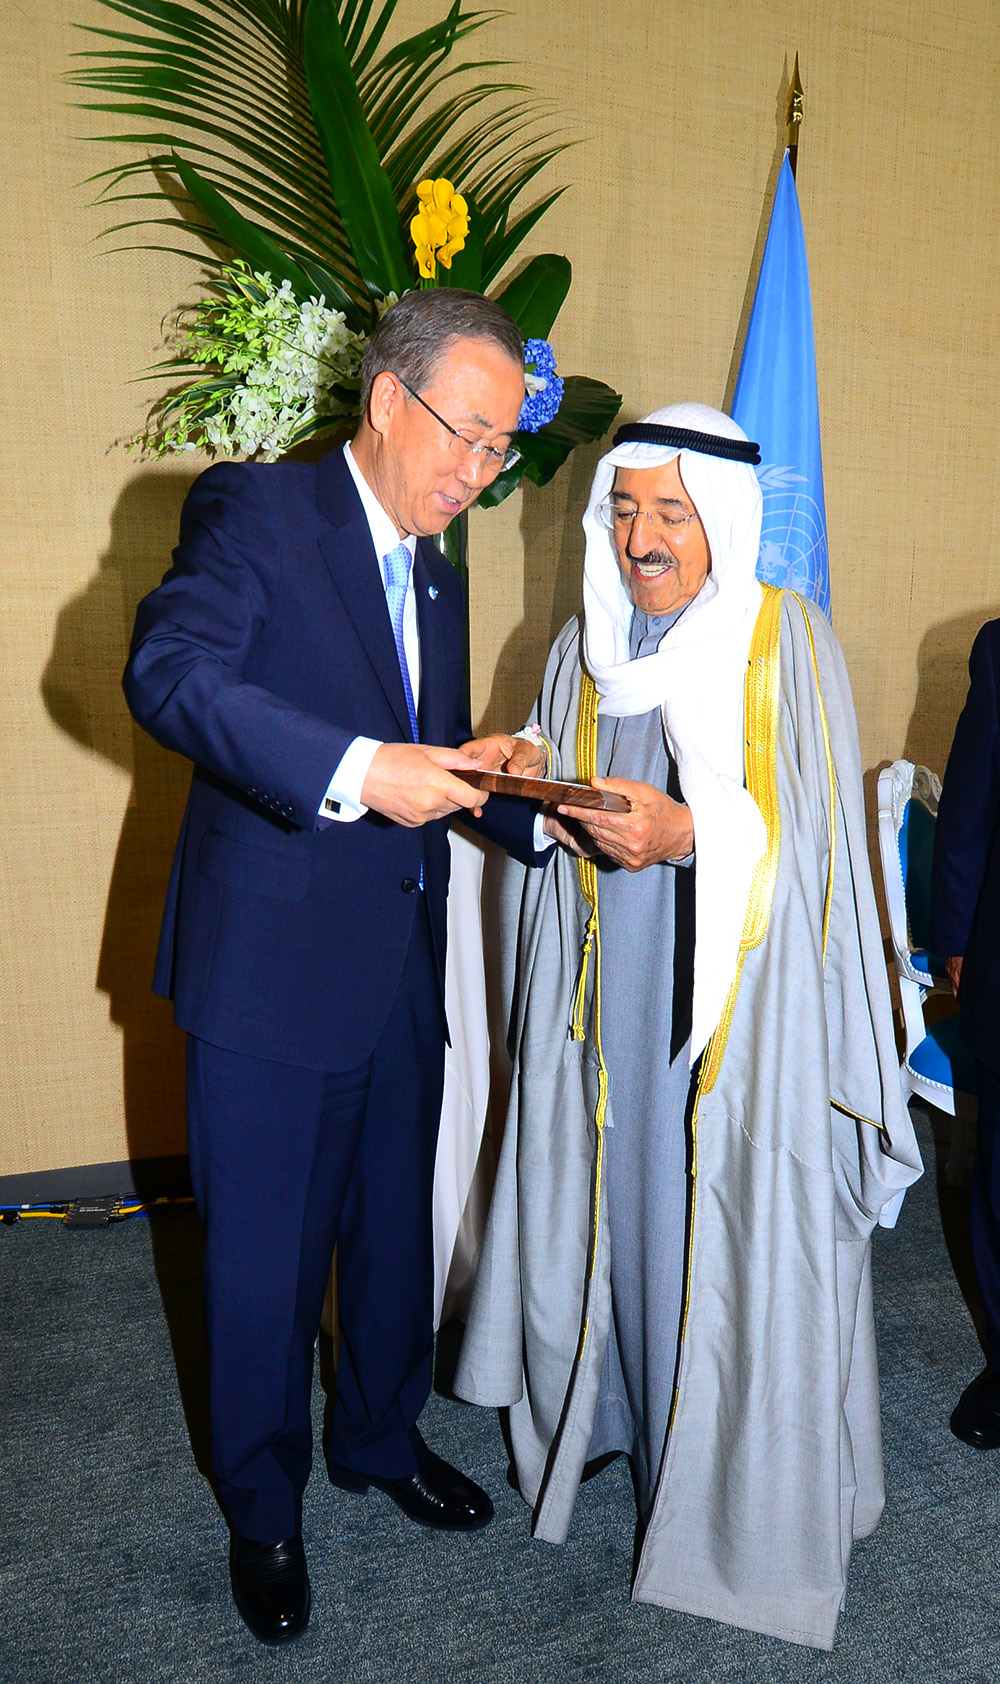 UN Secretary-General Ban Ki-moon by giving His Highness the Amir Sheikh Sabah Al-Ahmad Al-Jaber Al-Sabah certificate (humanitarian work commander) in recognition of his efforts and his contributions precious